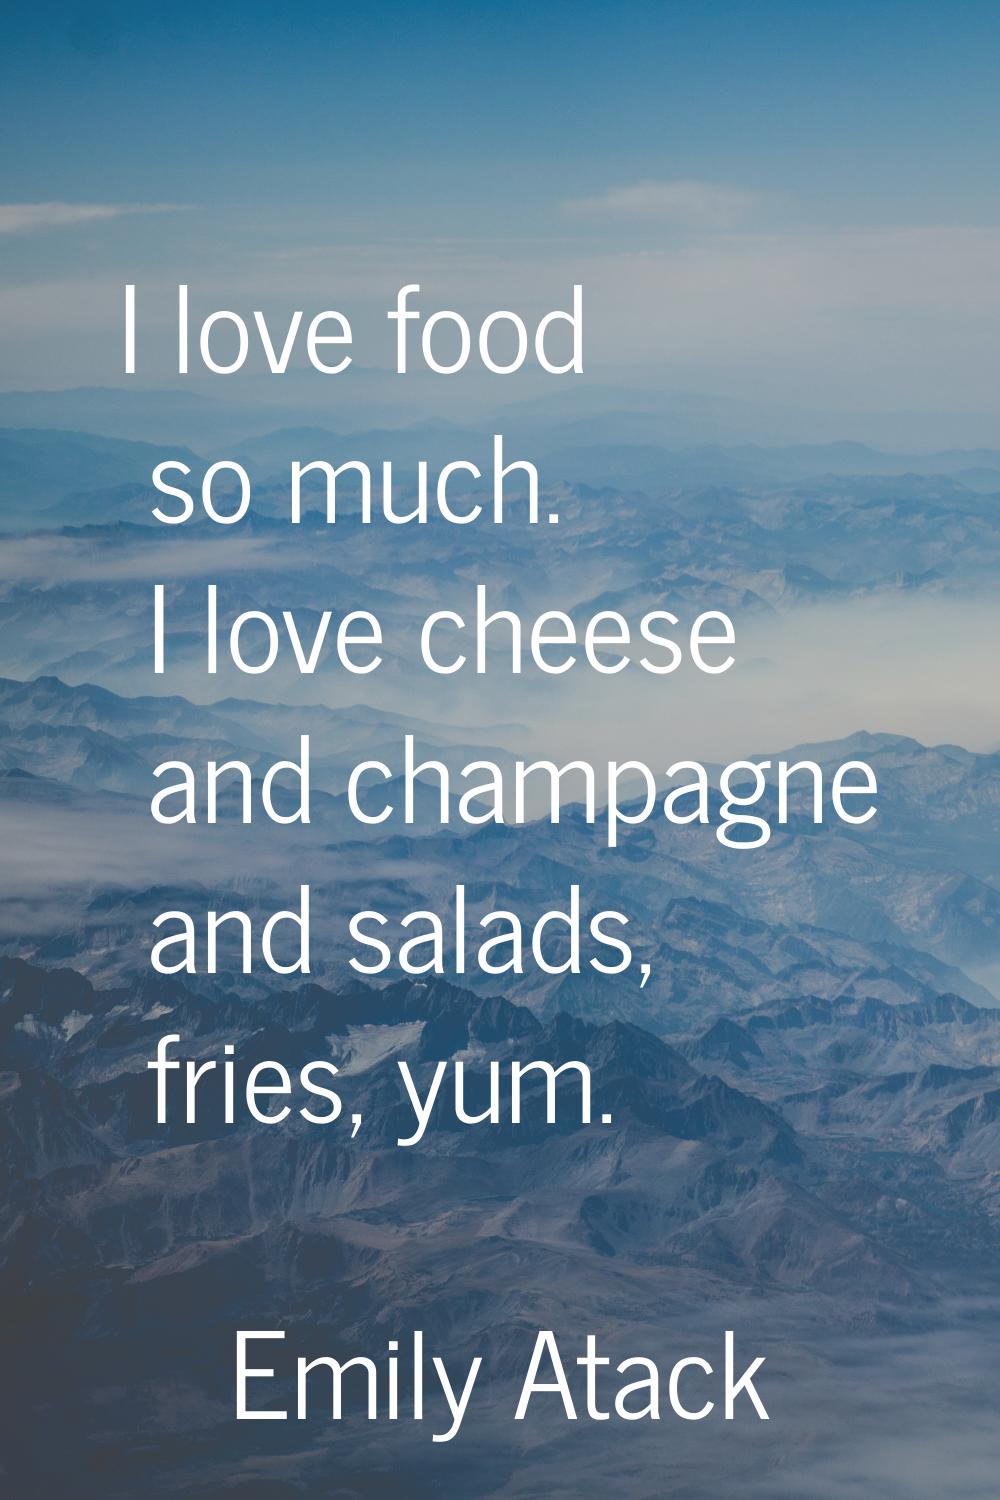 I love food so much. I love cheese and champagne and salads, fries, yum.